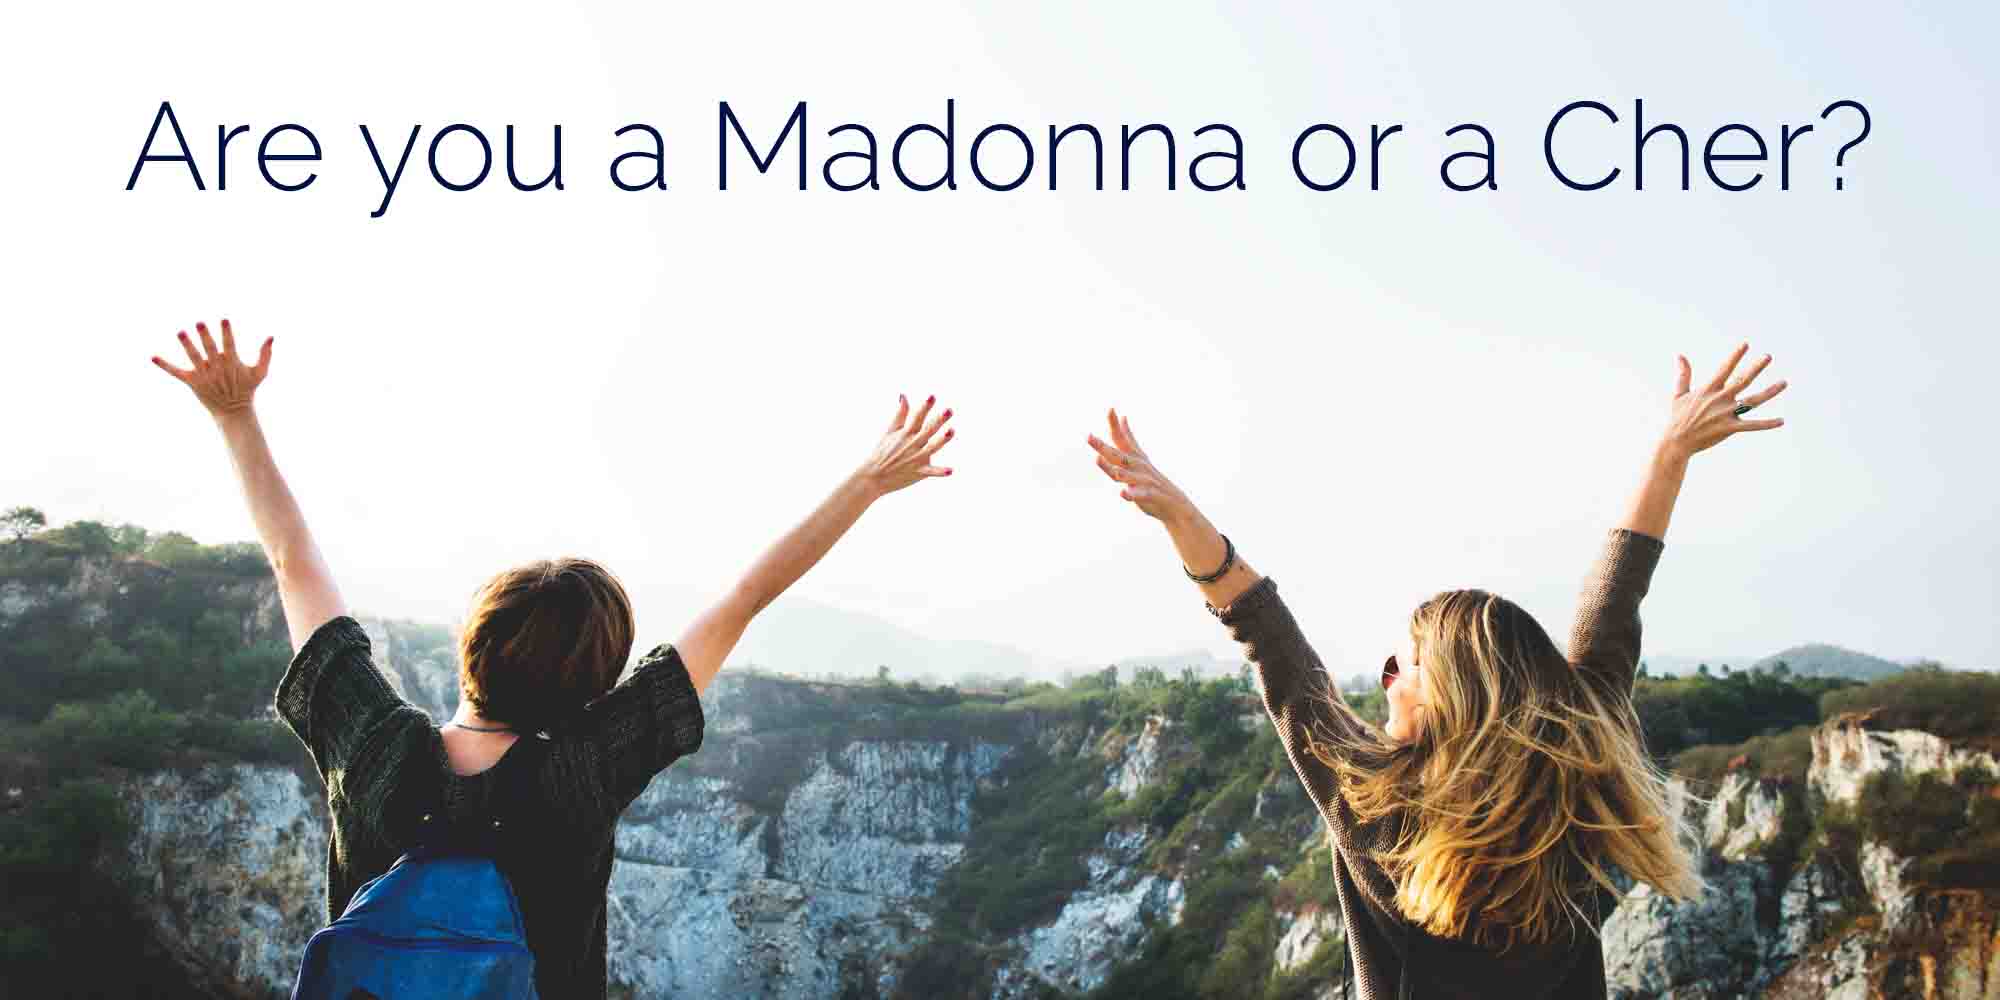 Are you a Madonna or a Cher?